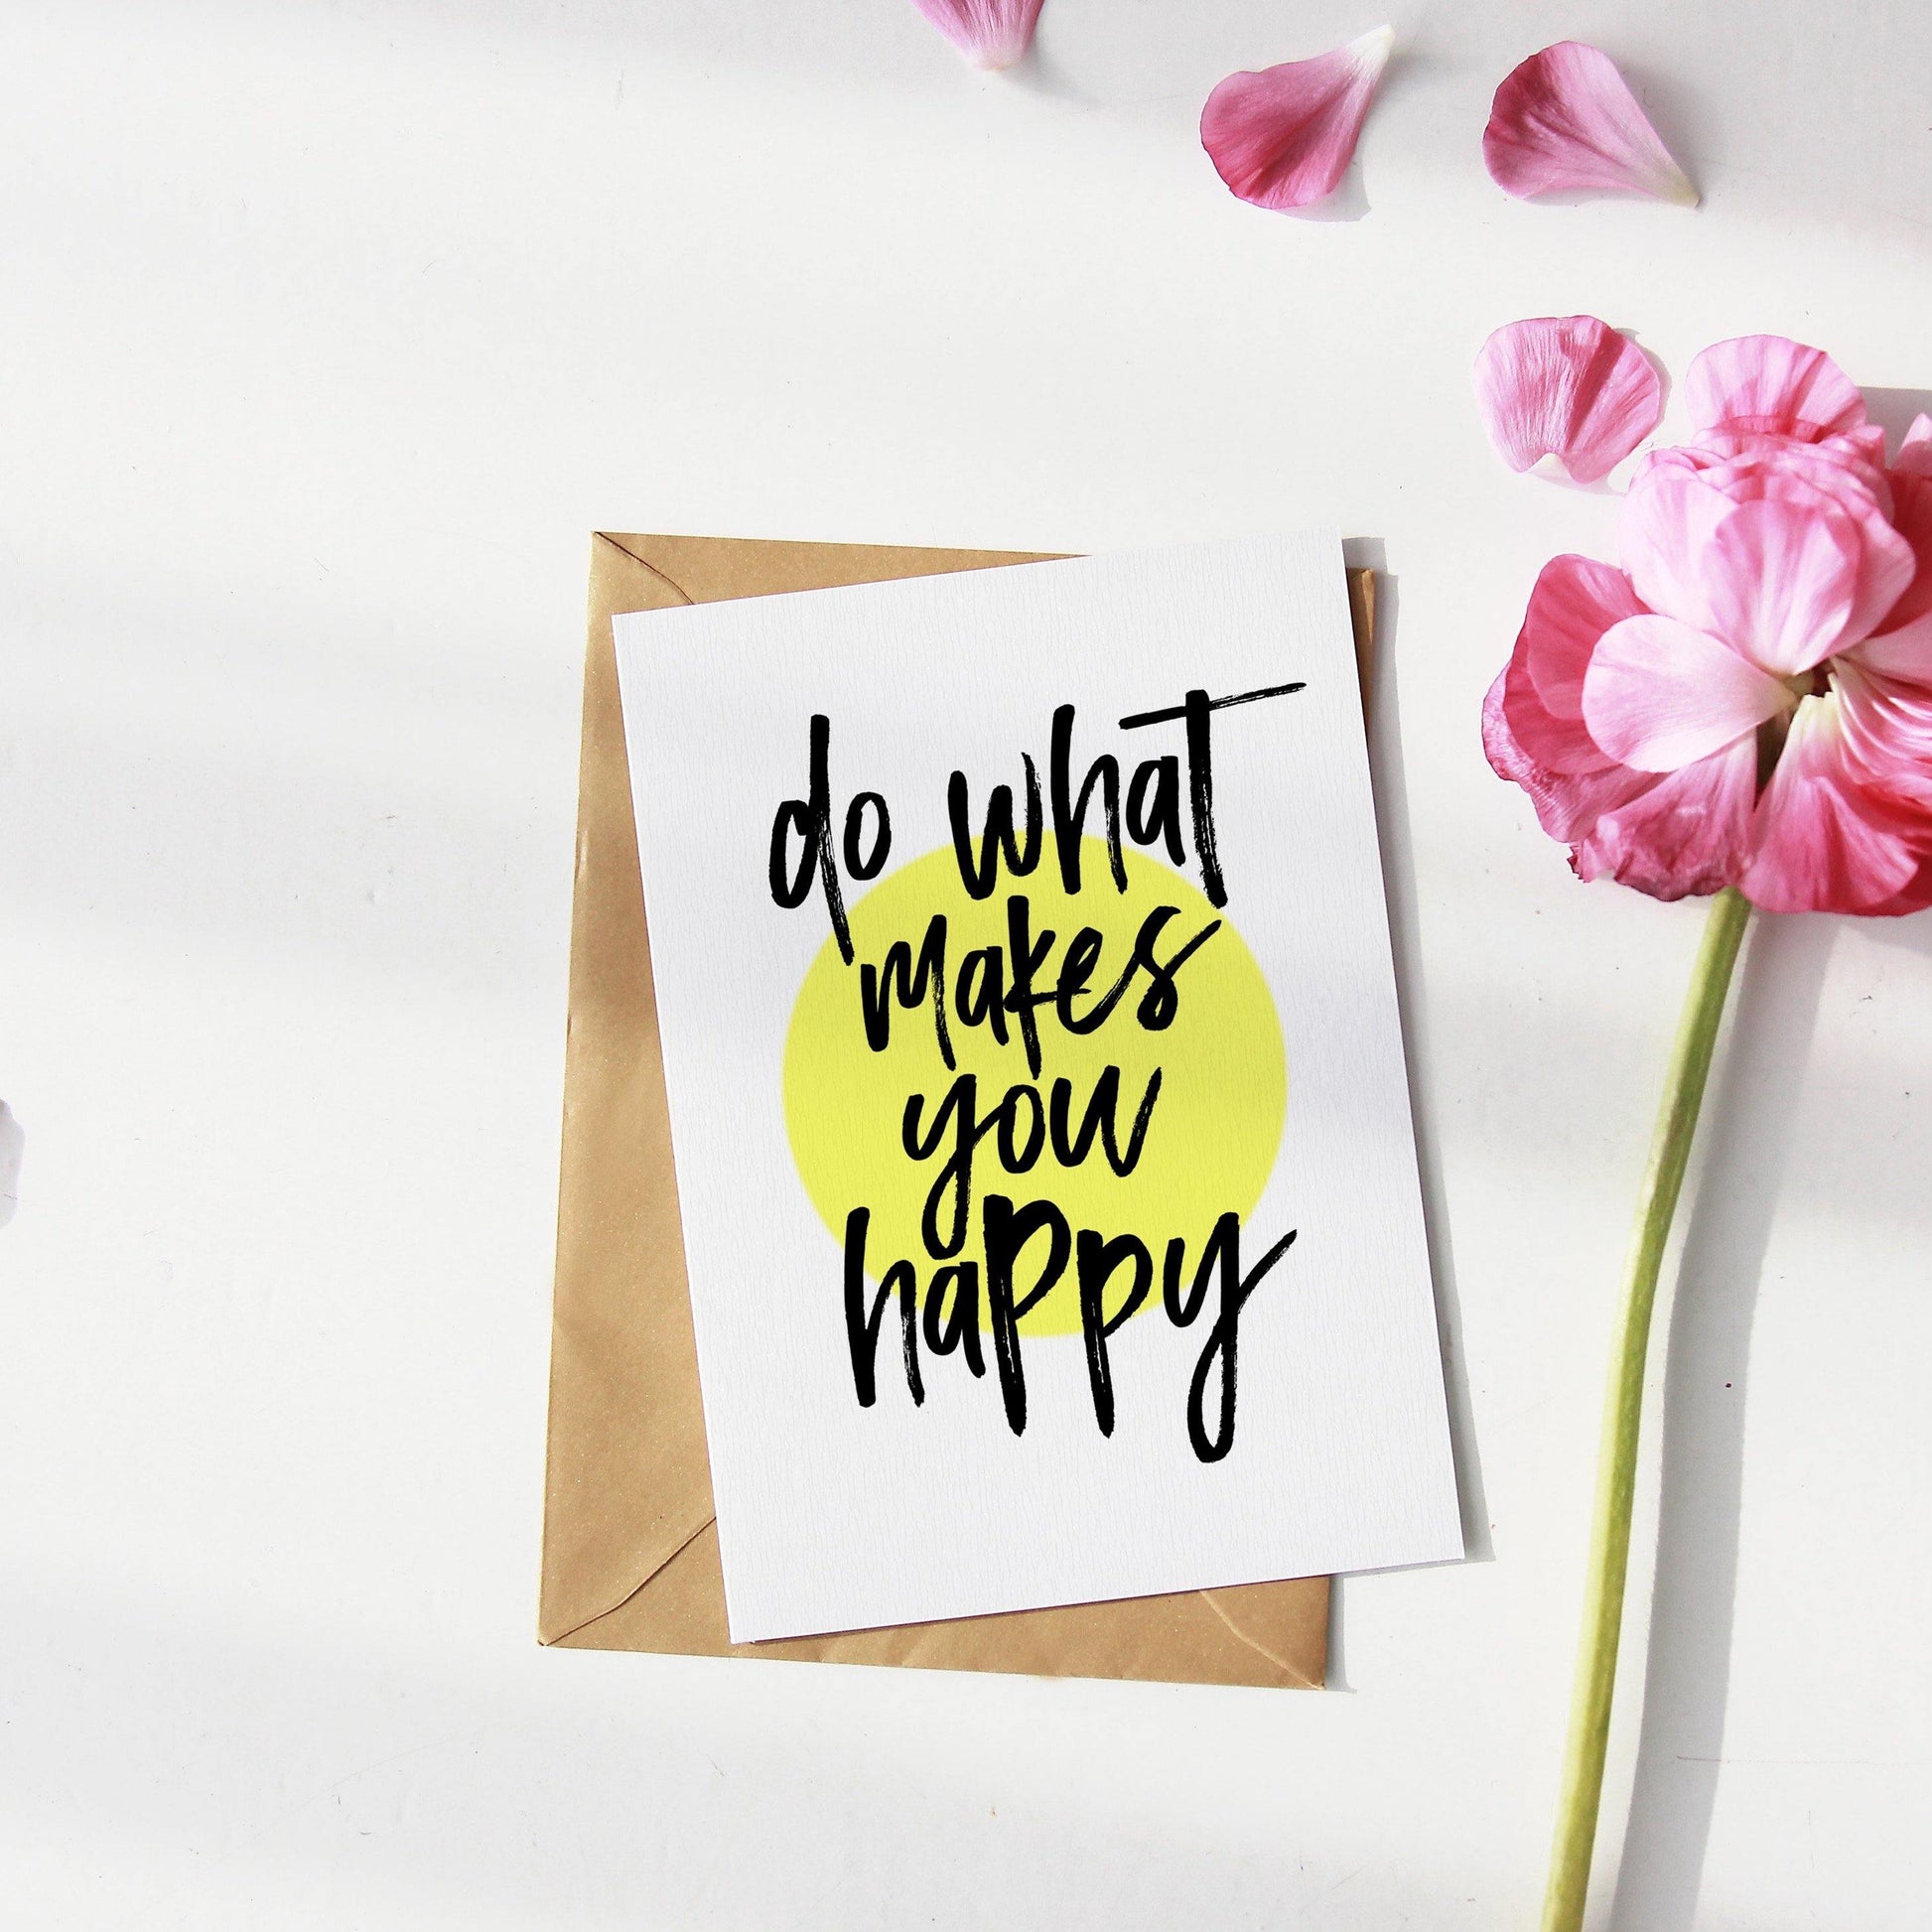 Do More Of What Makes You Happy | Inspirational Quote Print | Motivational Prints | Wall Art Home Decor